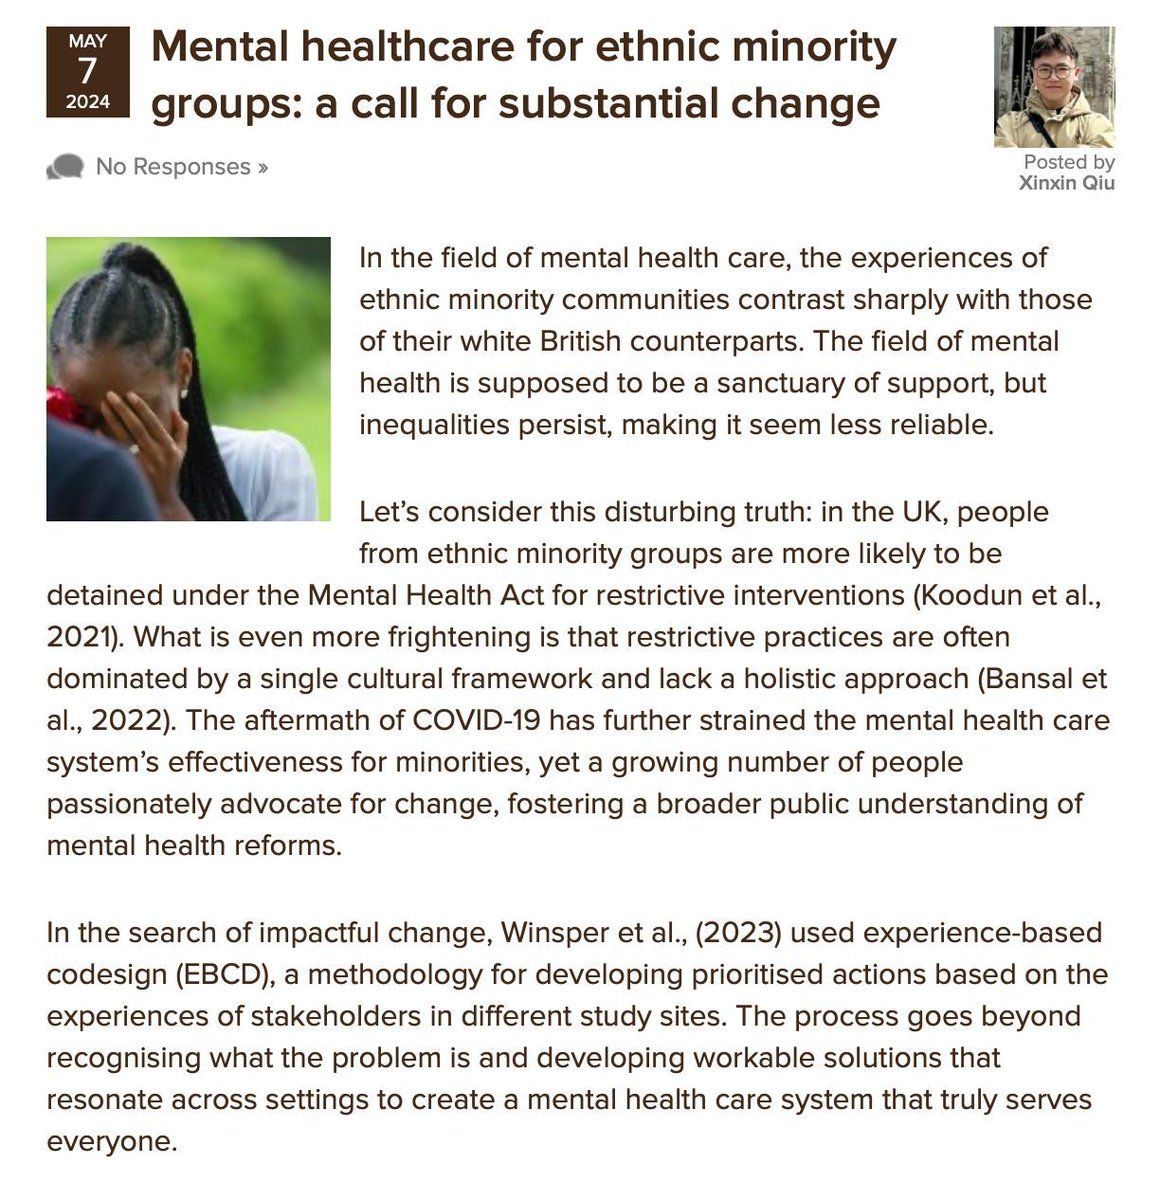 KCL Masters student Xinxin Qiu discusses a recent study by @CatherineWinsp1 et al, published in @BMJMentalHealth, about improving mental healthcare access and experiences for ethnically minoritised people in the UK nationalelfservice.net/?p=191836